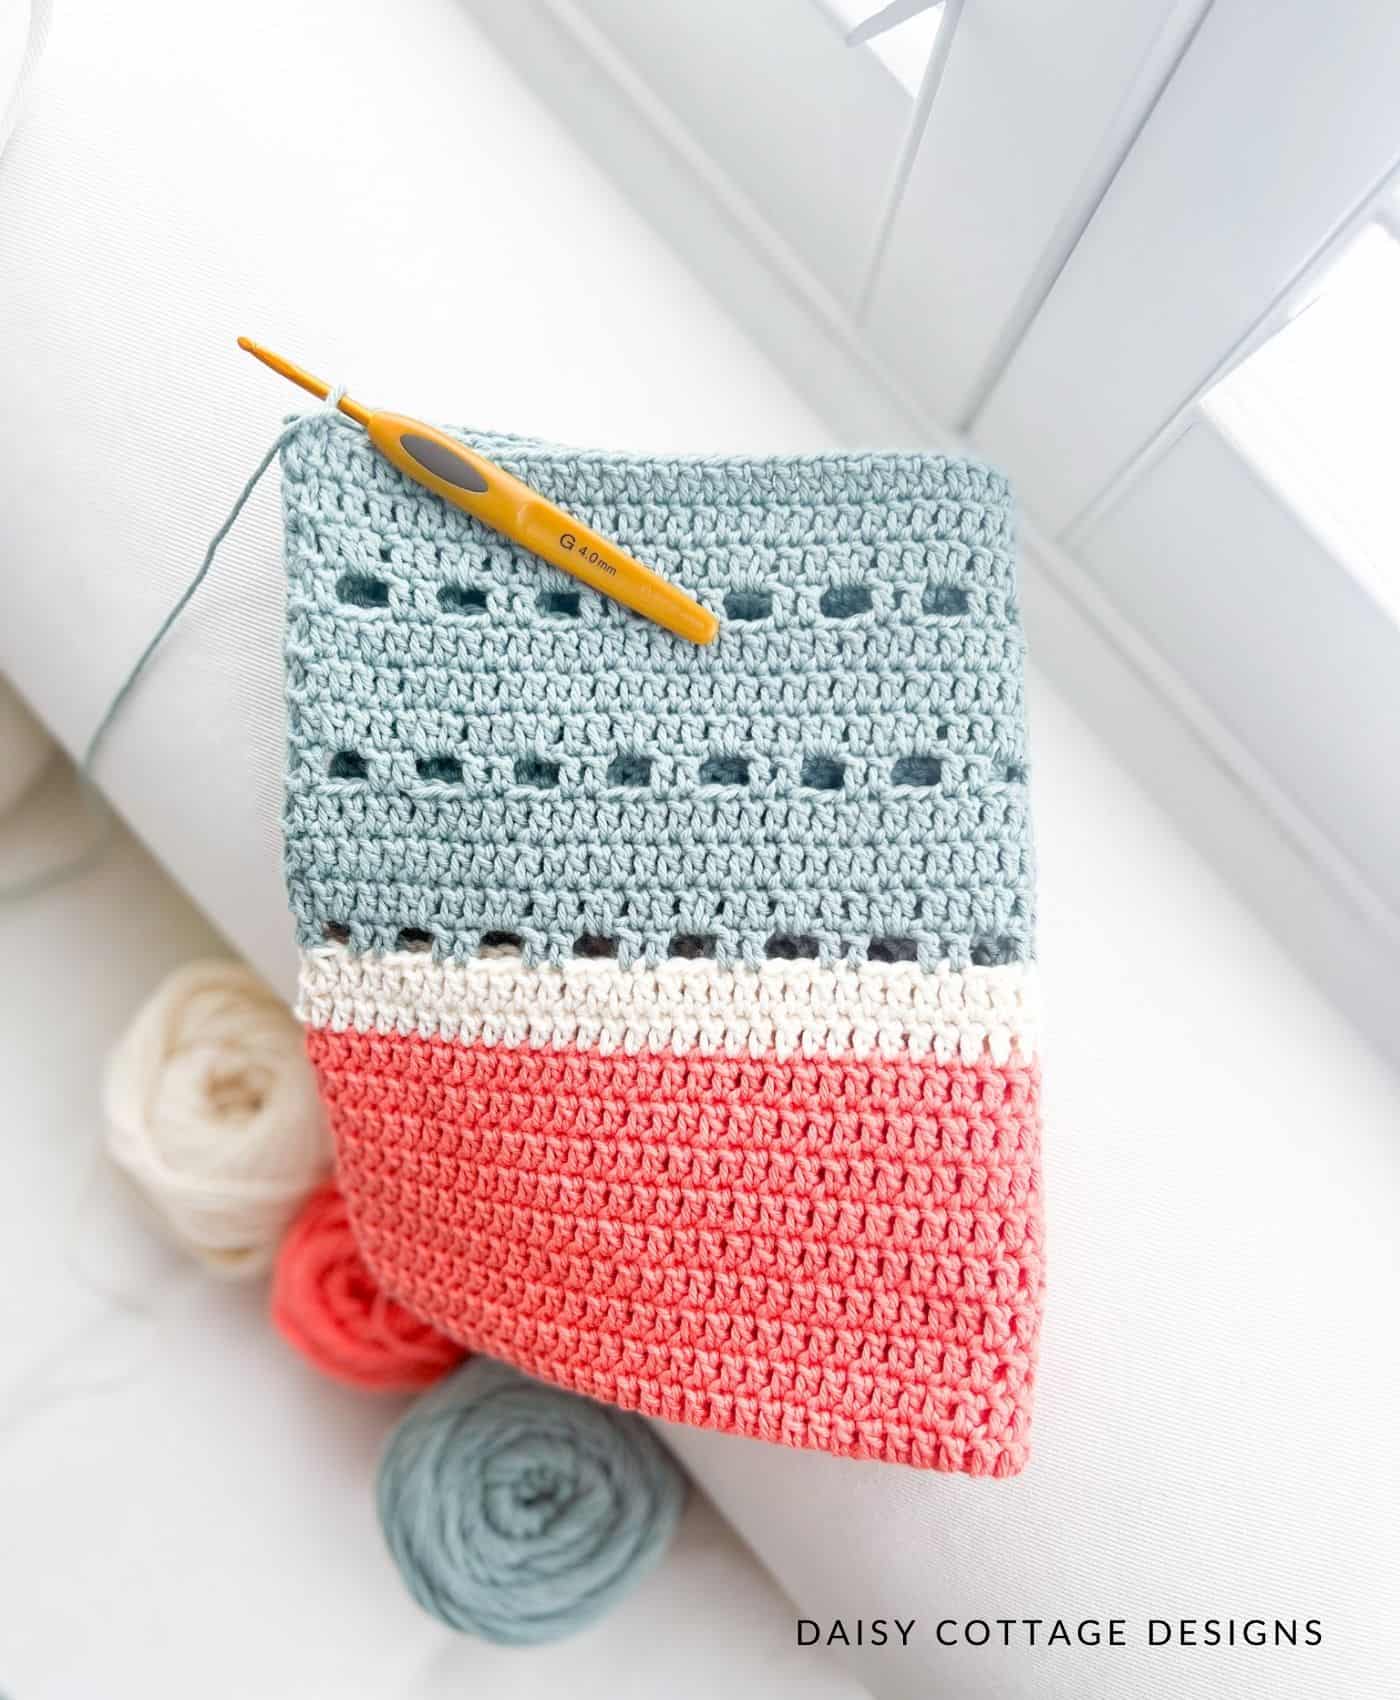 Neat and tight crochet stitches